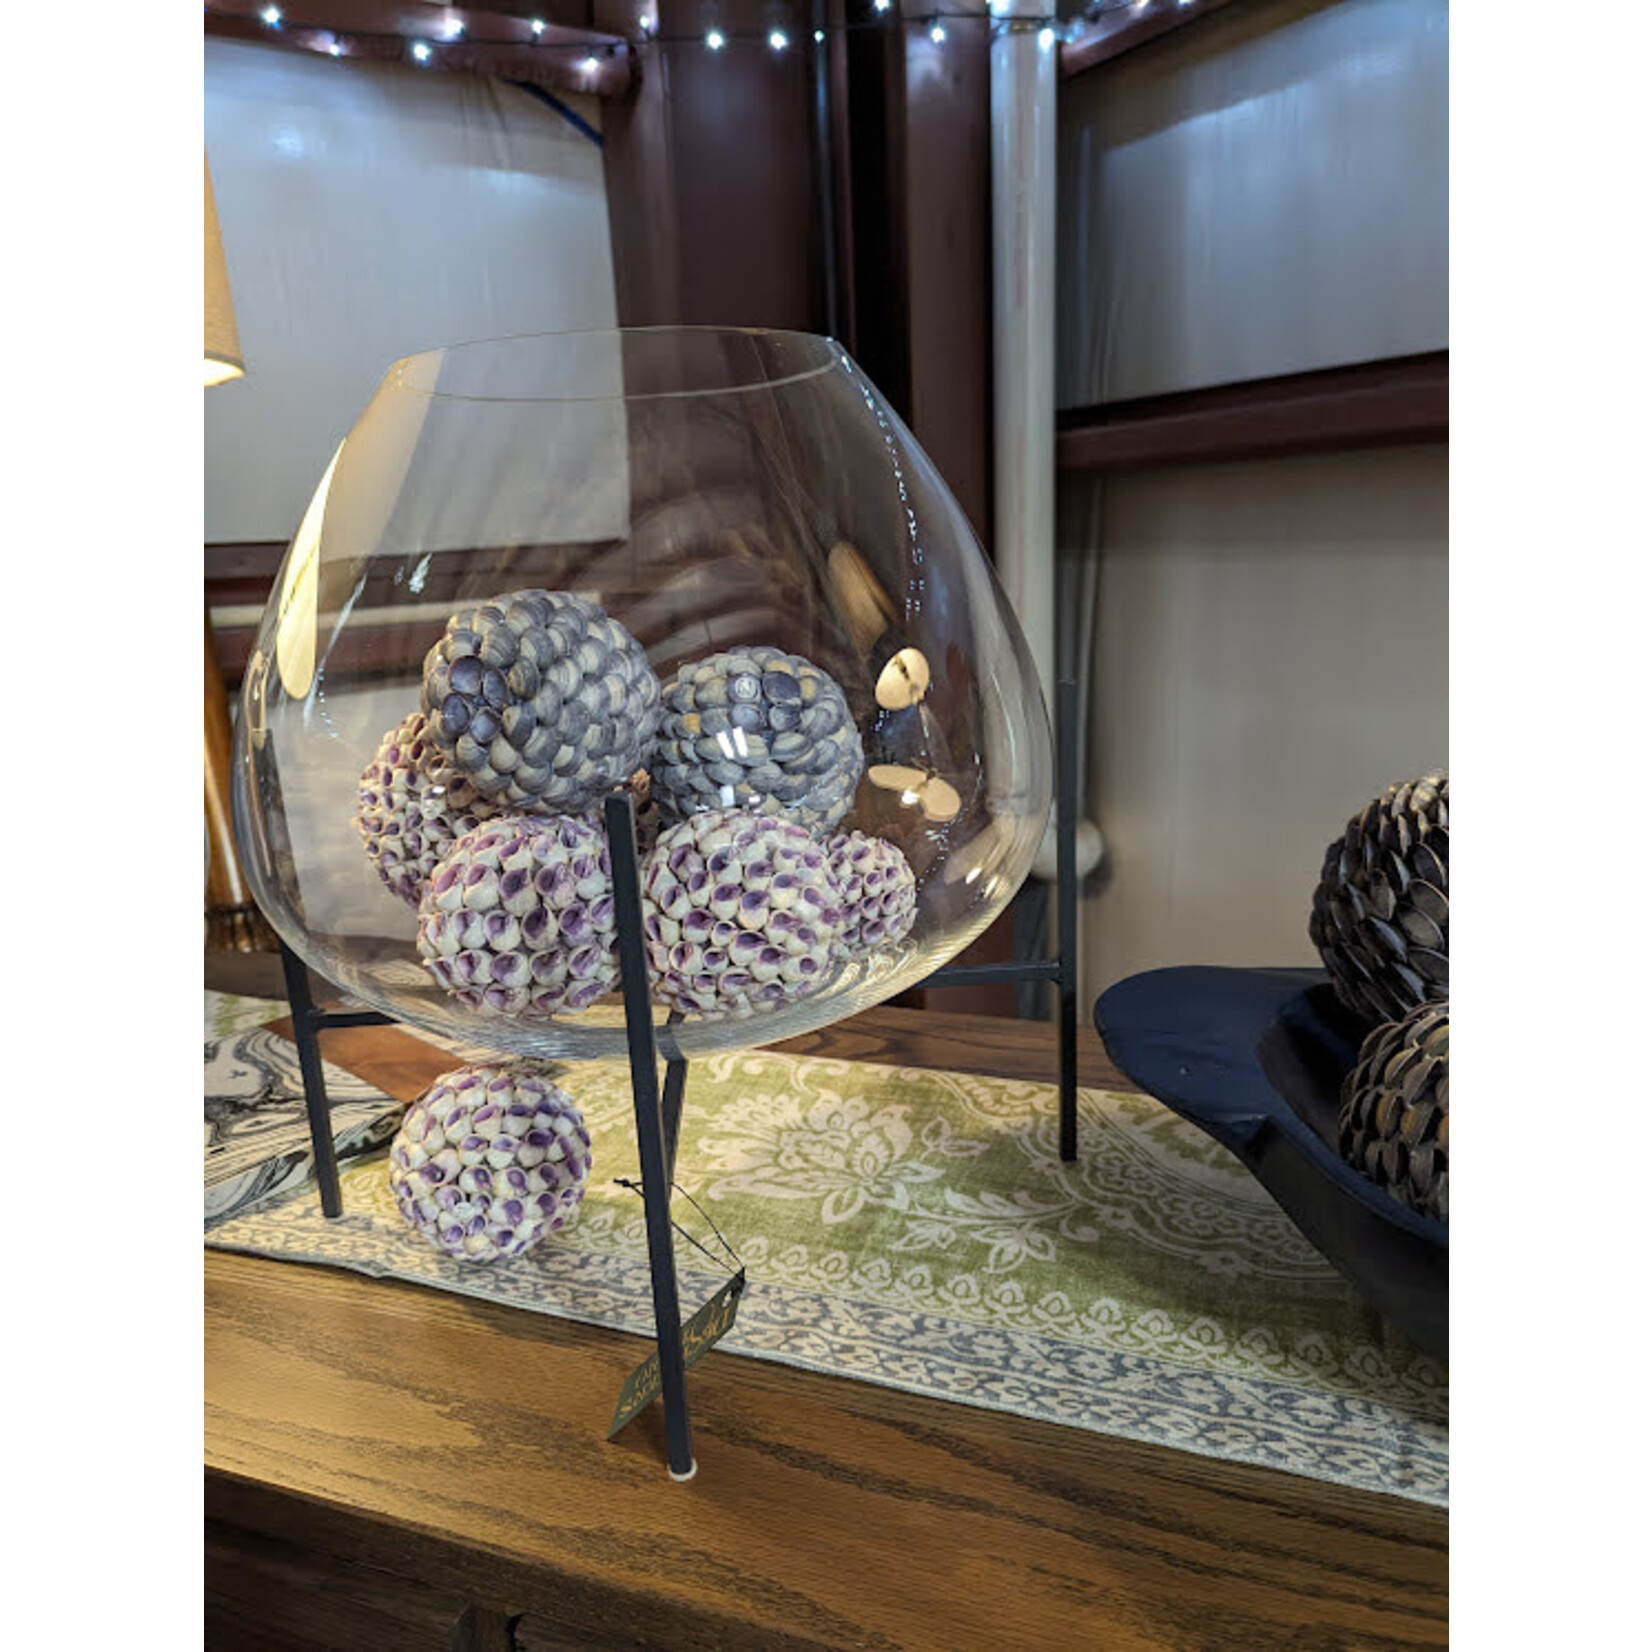 Roost Lavender Shell Sphere 3.5"